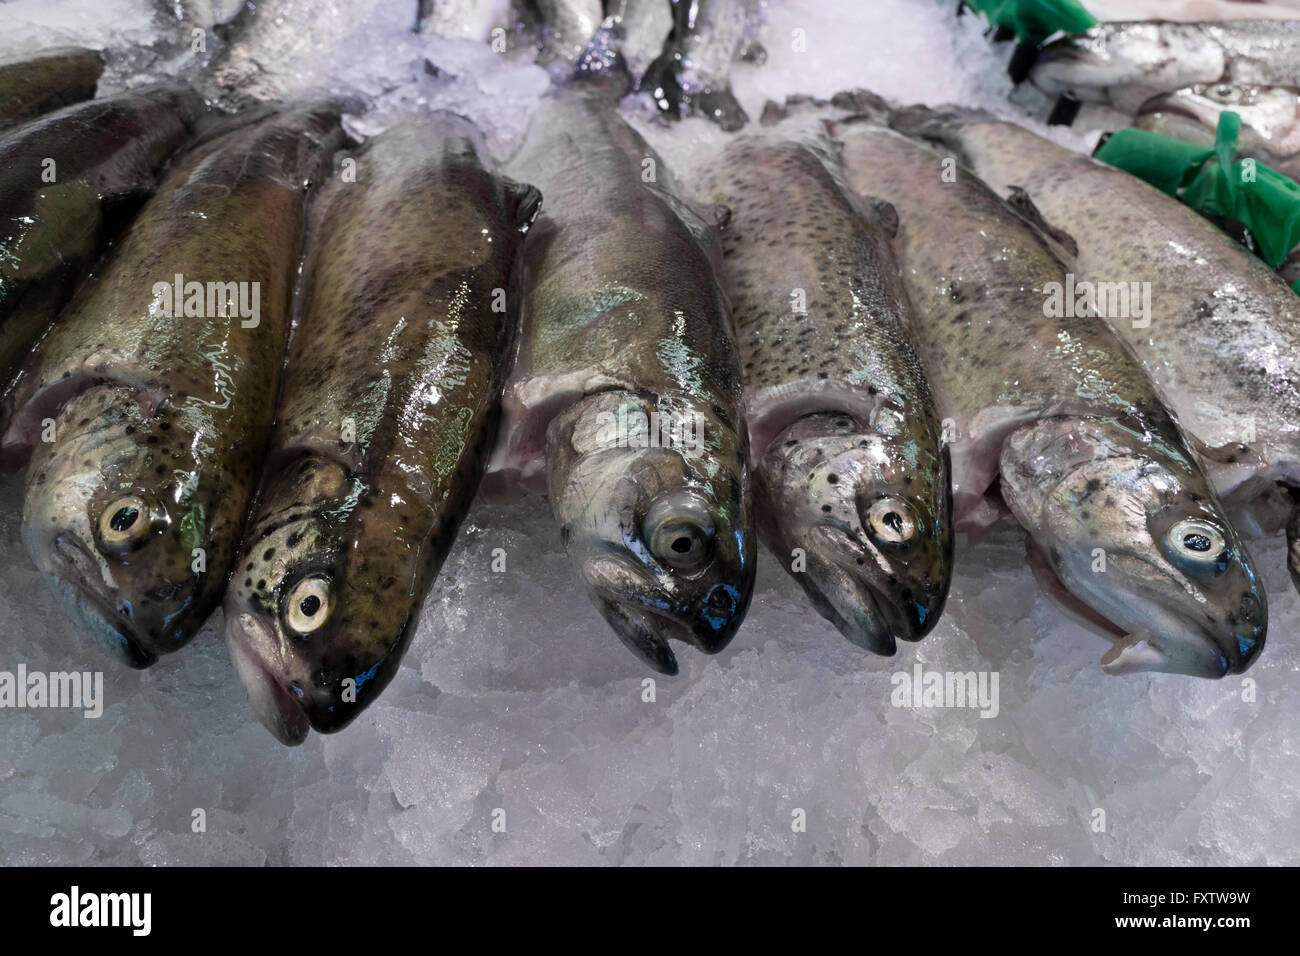 Fresh raw trout fishes on ice Stock Photo